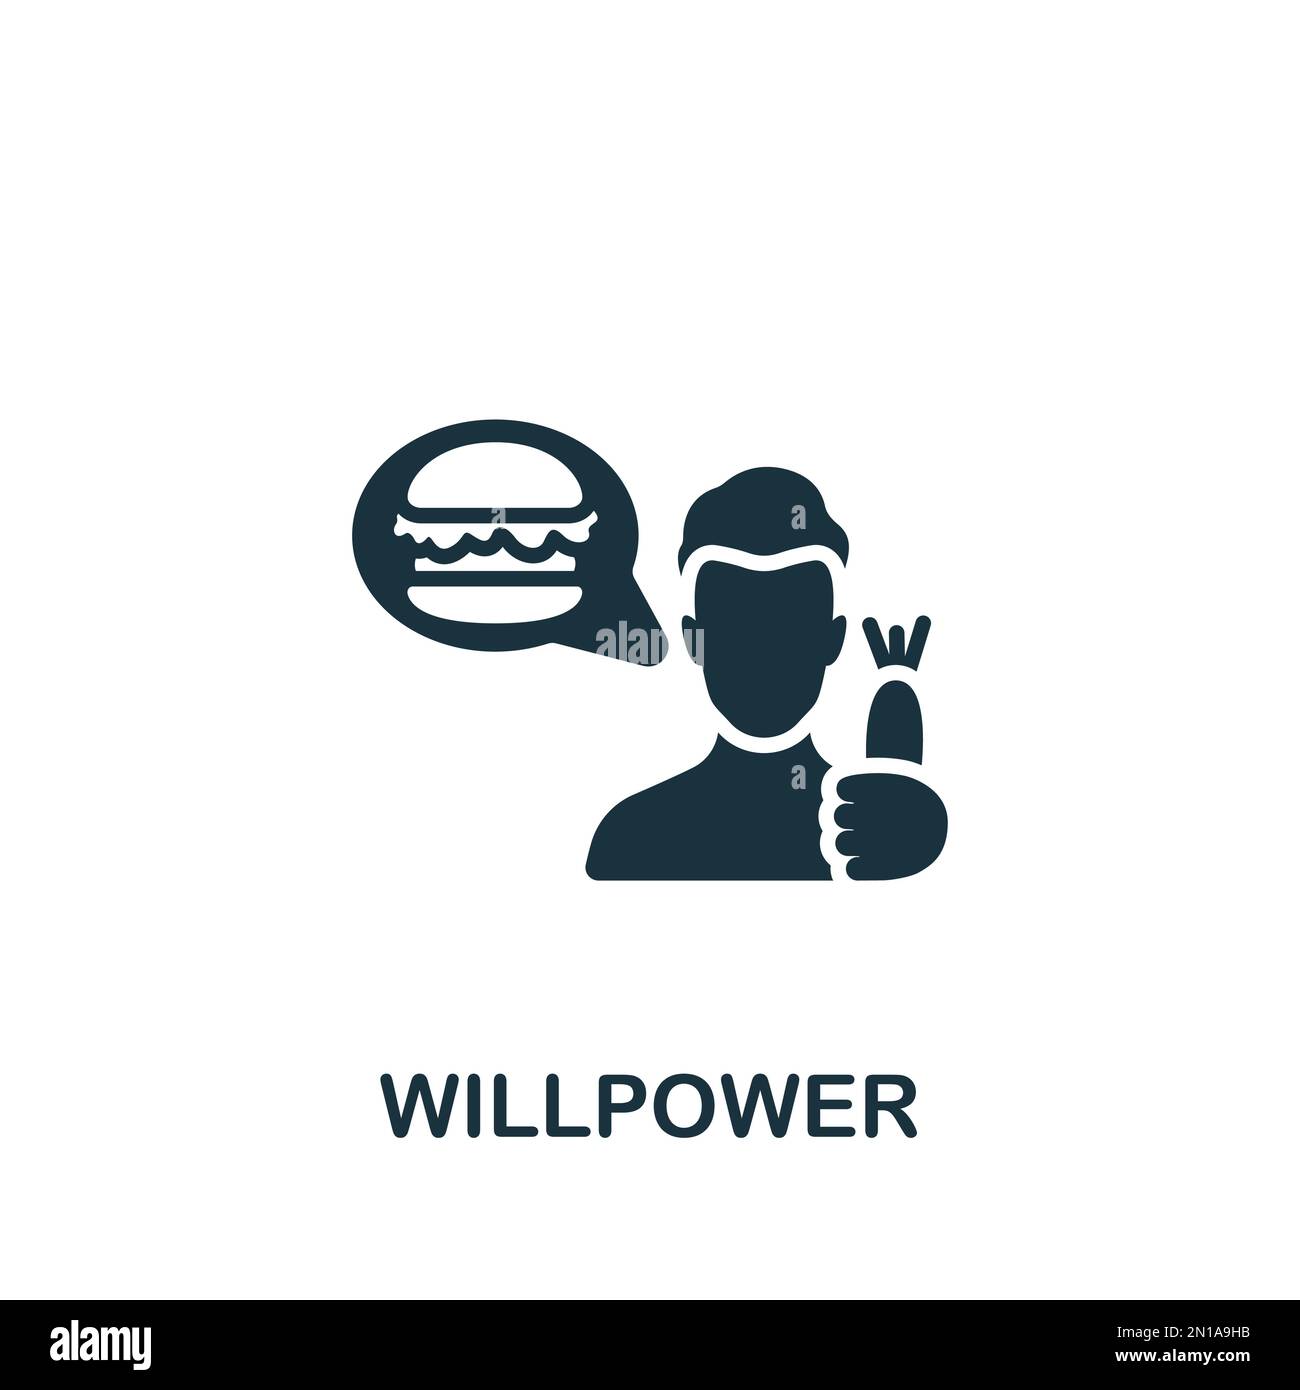 Willpower icon. Monochrome simple sign from core values collection. Willpower icon for logo, templates, web design and infographics. Stock Vector